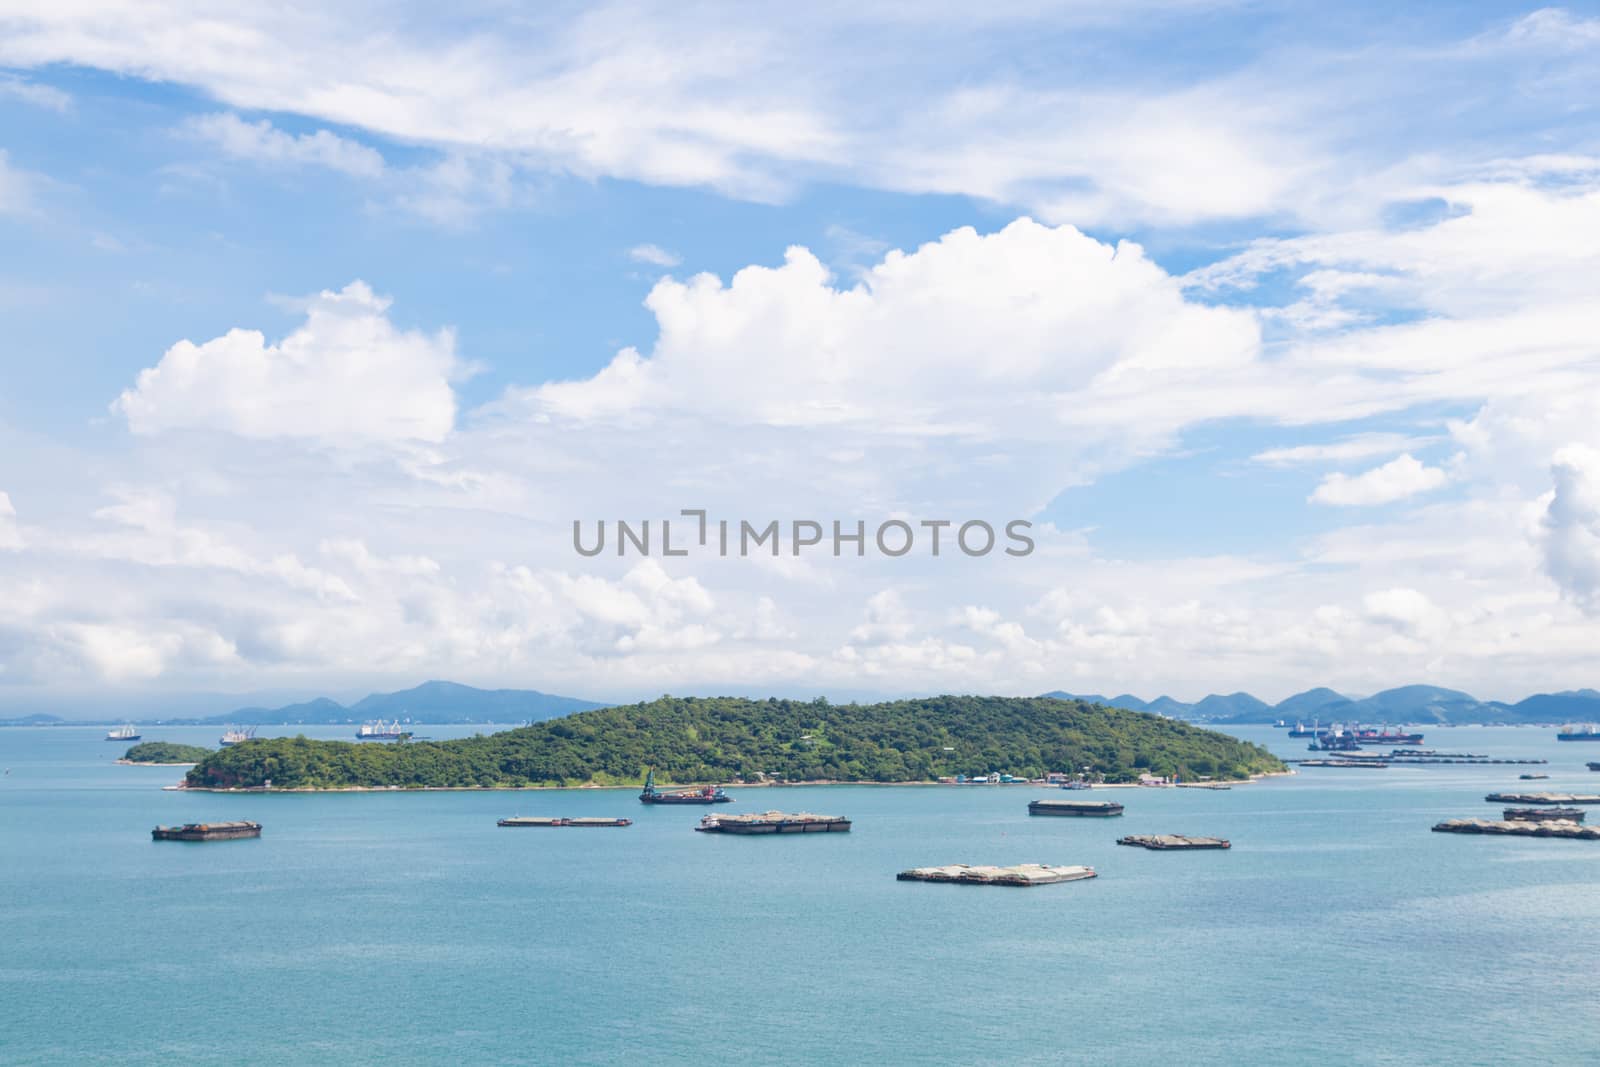 Cargo ships in the sea by a454